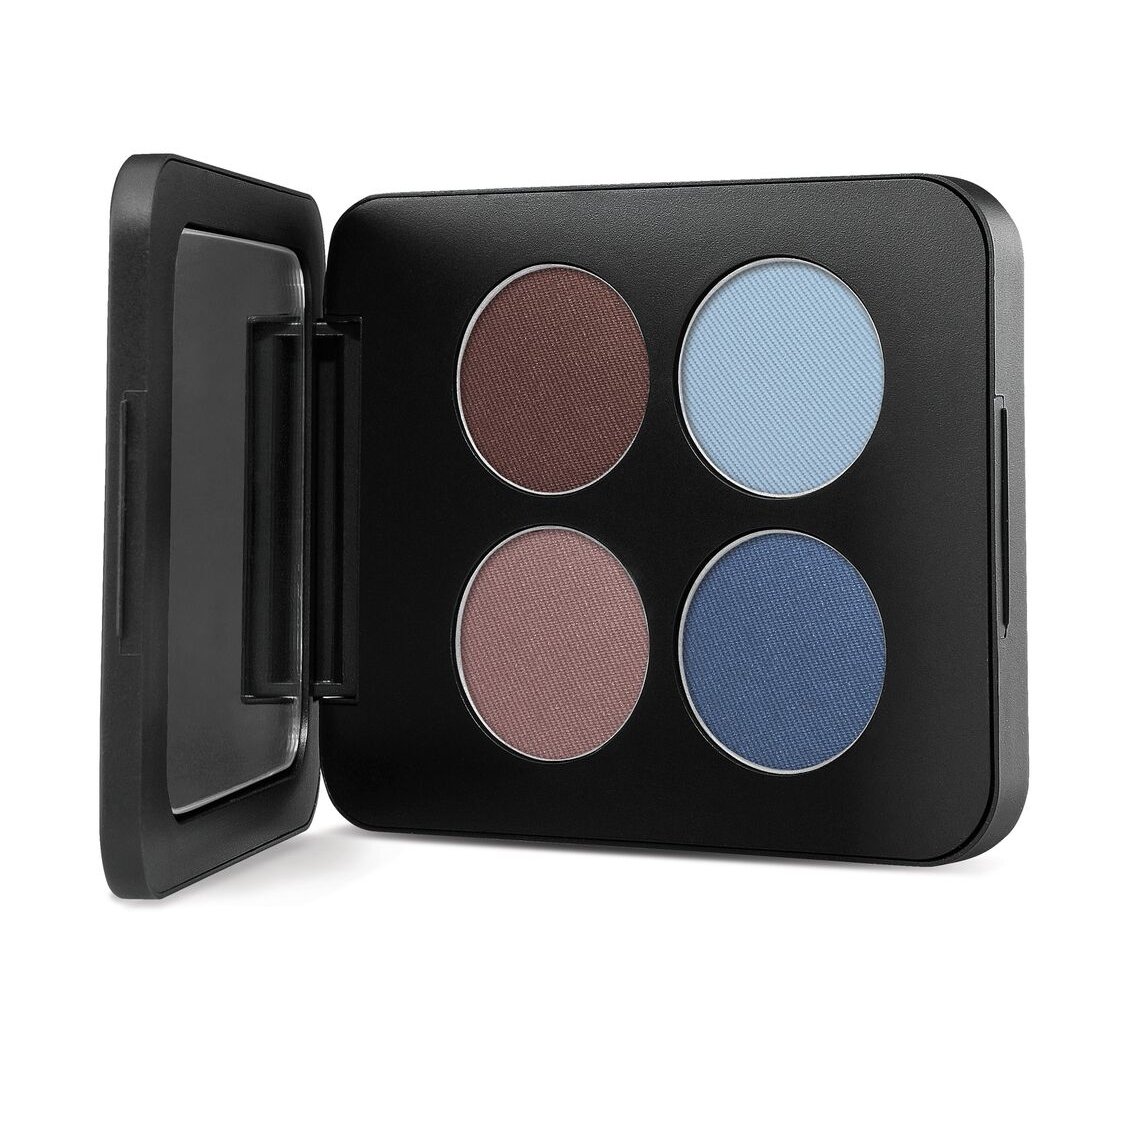 Youngblood pressed mineral eyeshadow quad =glamour eyes